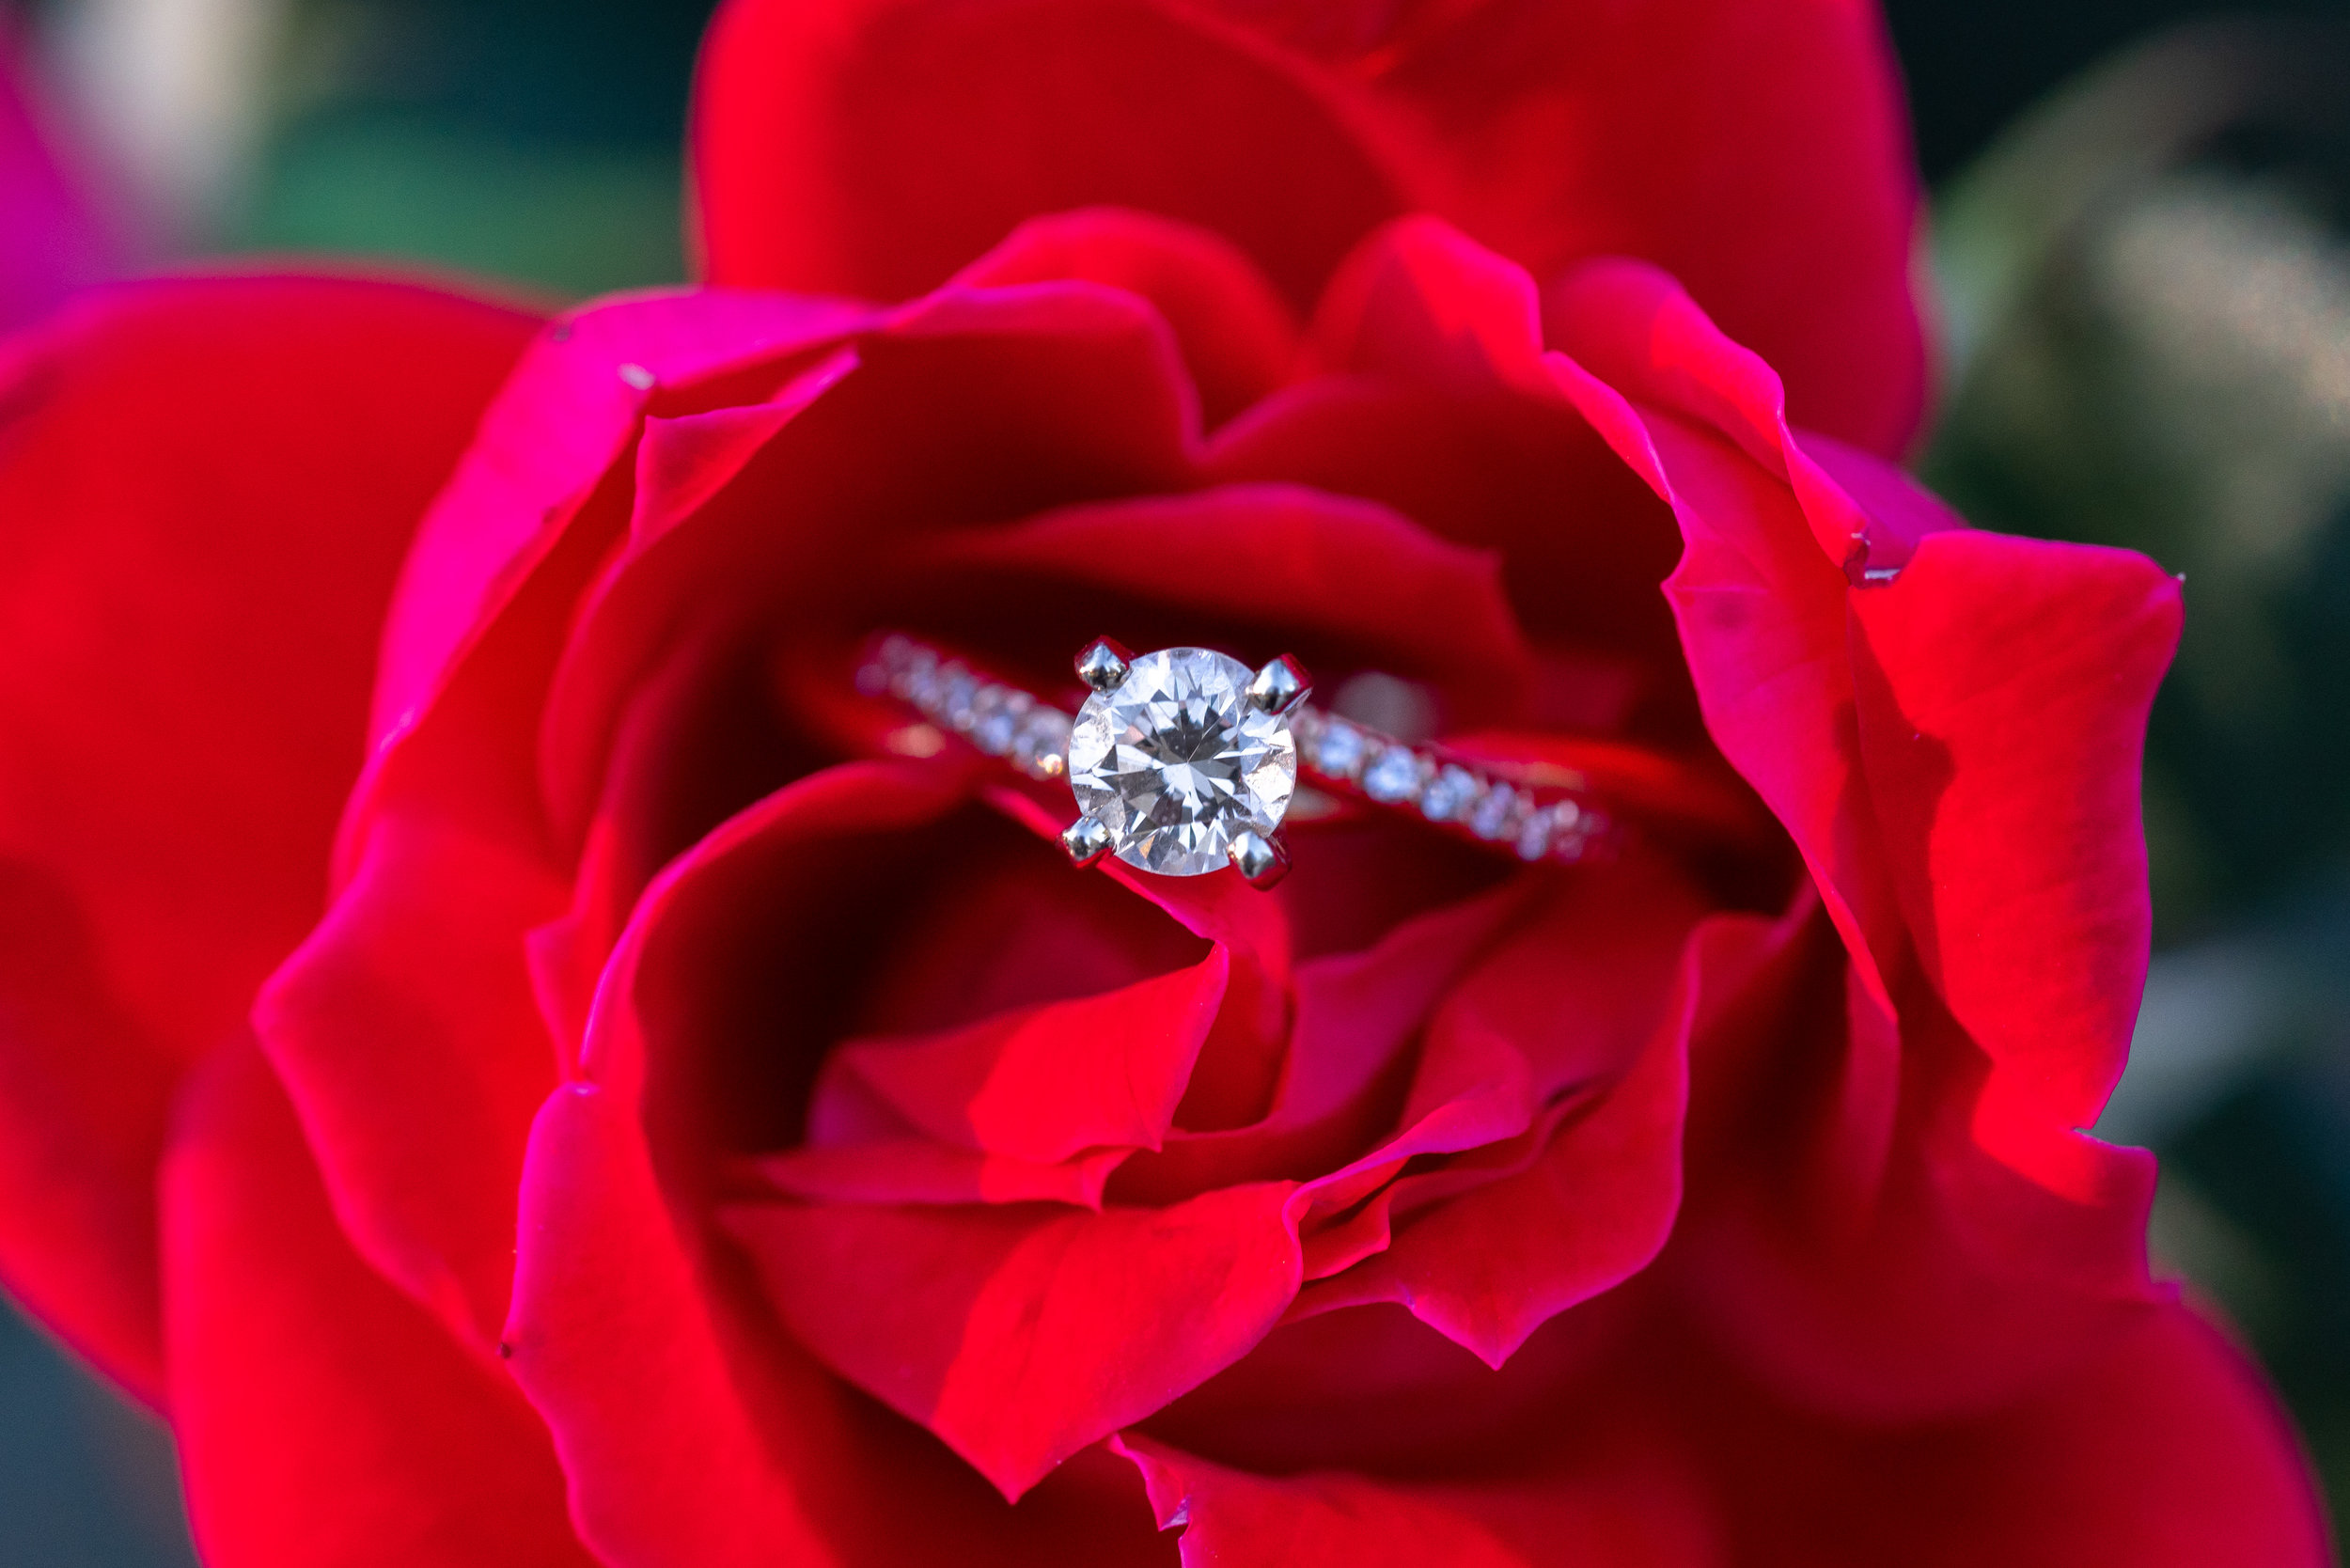 Round solitaire engagement ring in a red rose at Federal Hill Park in Baltimore